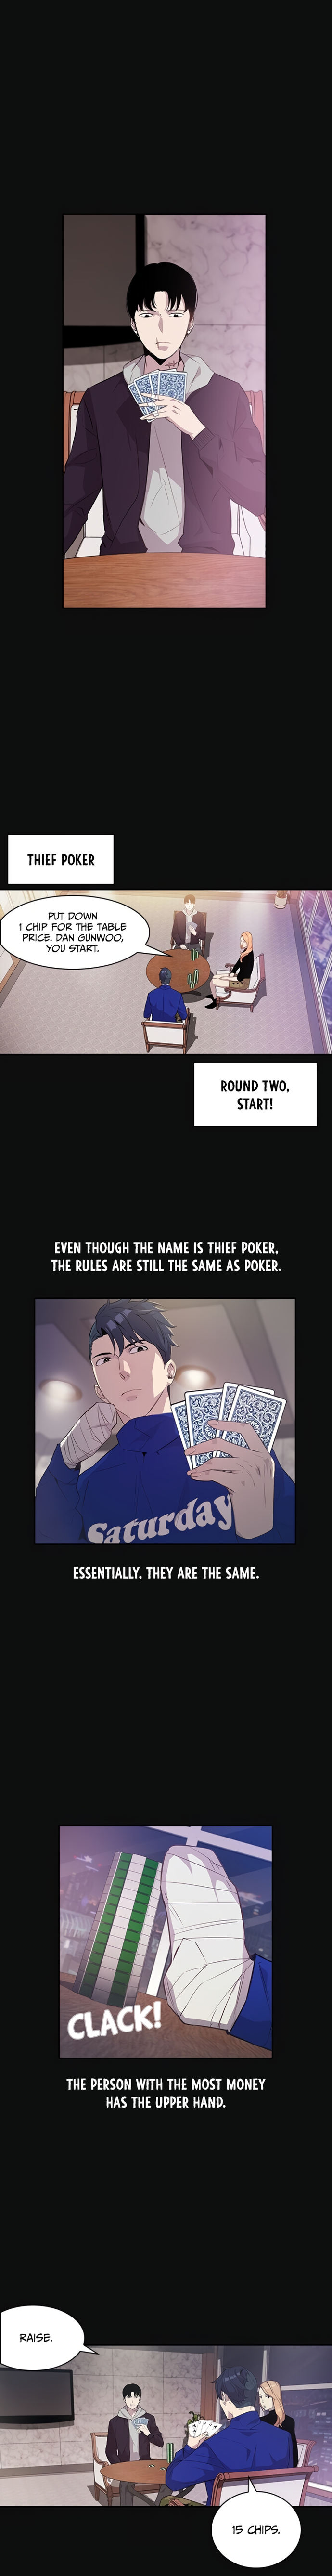 The World Is Money and Power - Chapter 22 Page 11